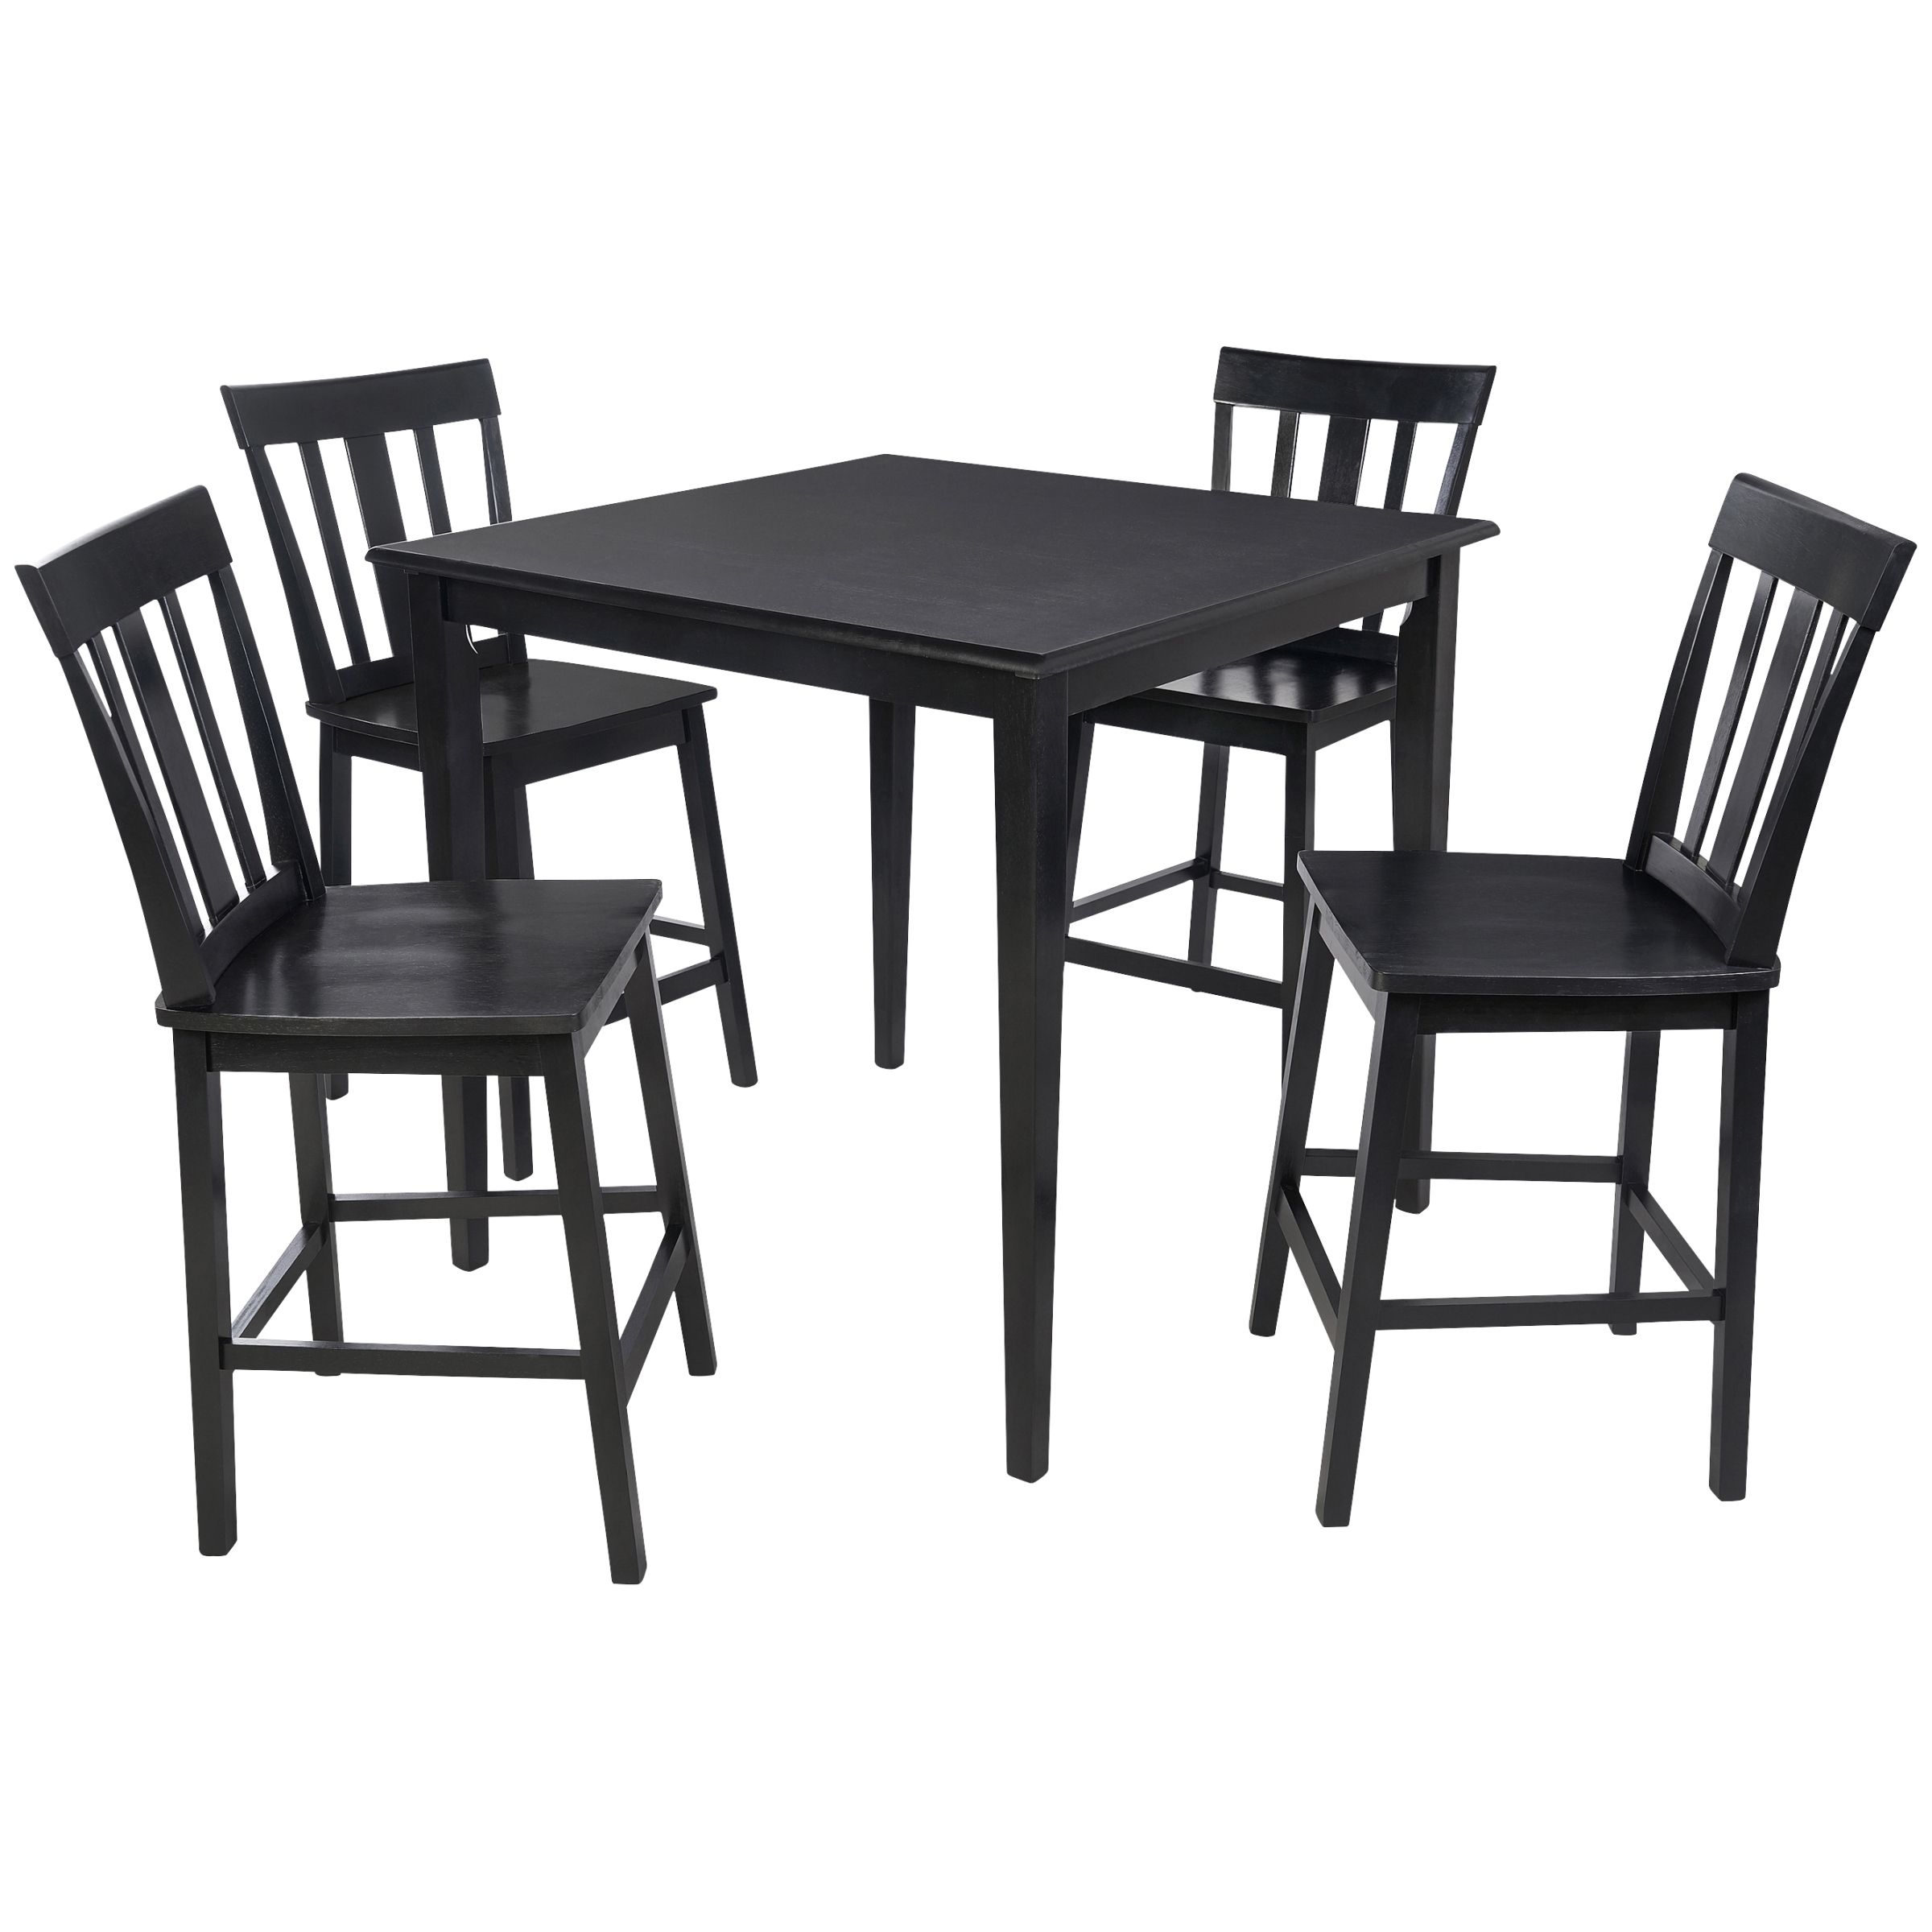 Mainstays 5 Piece Mission Counter Height Dining Set – Walmart In Best And Newest Pierce 5 Piece Counter Sets (View 22 of 25)